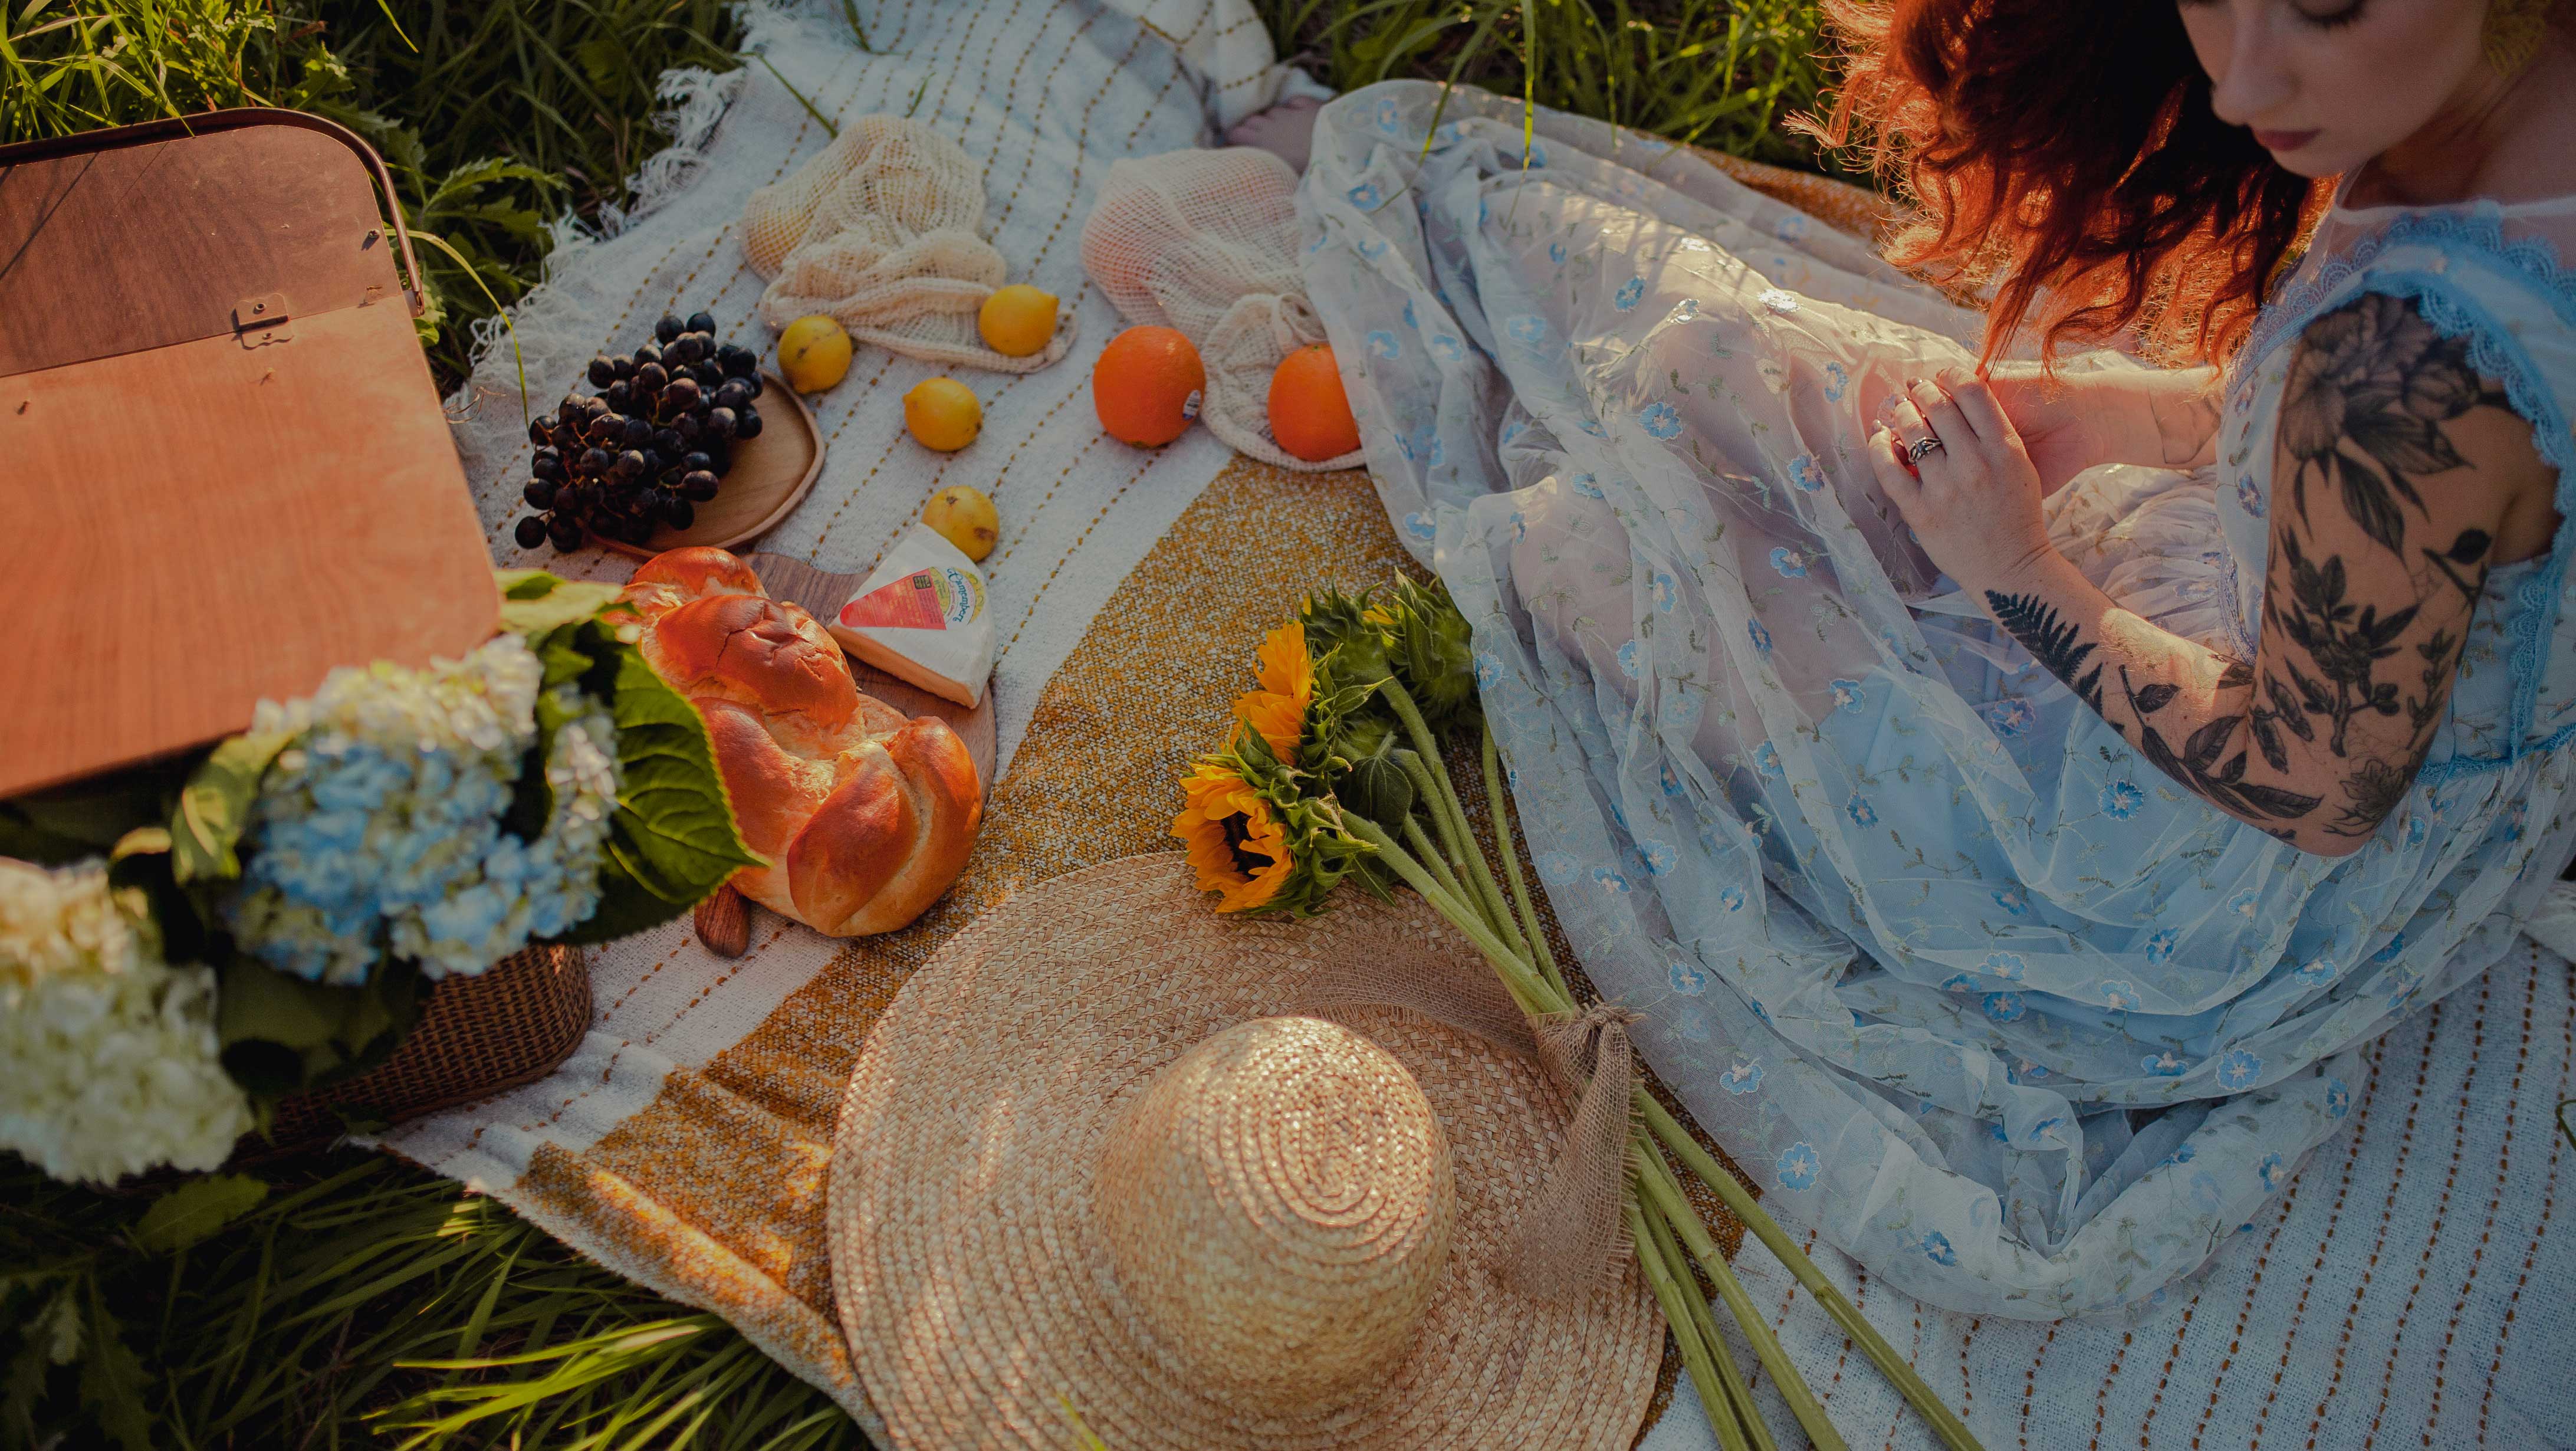 A beautiful overhead look at a lady having a picnic outdoors in the sun